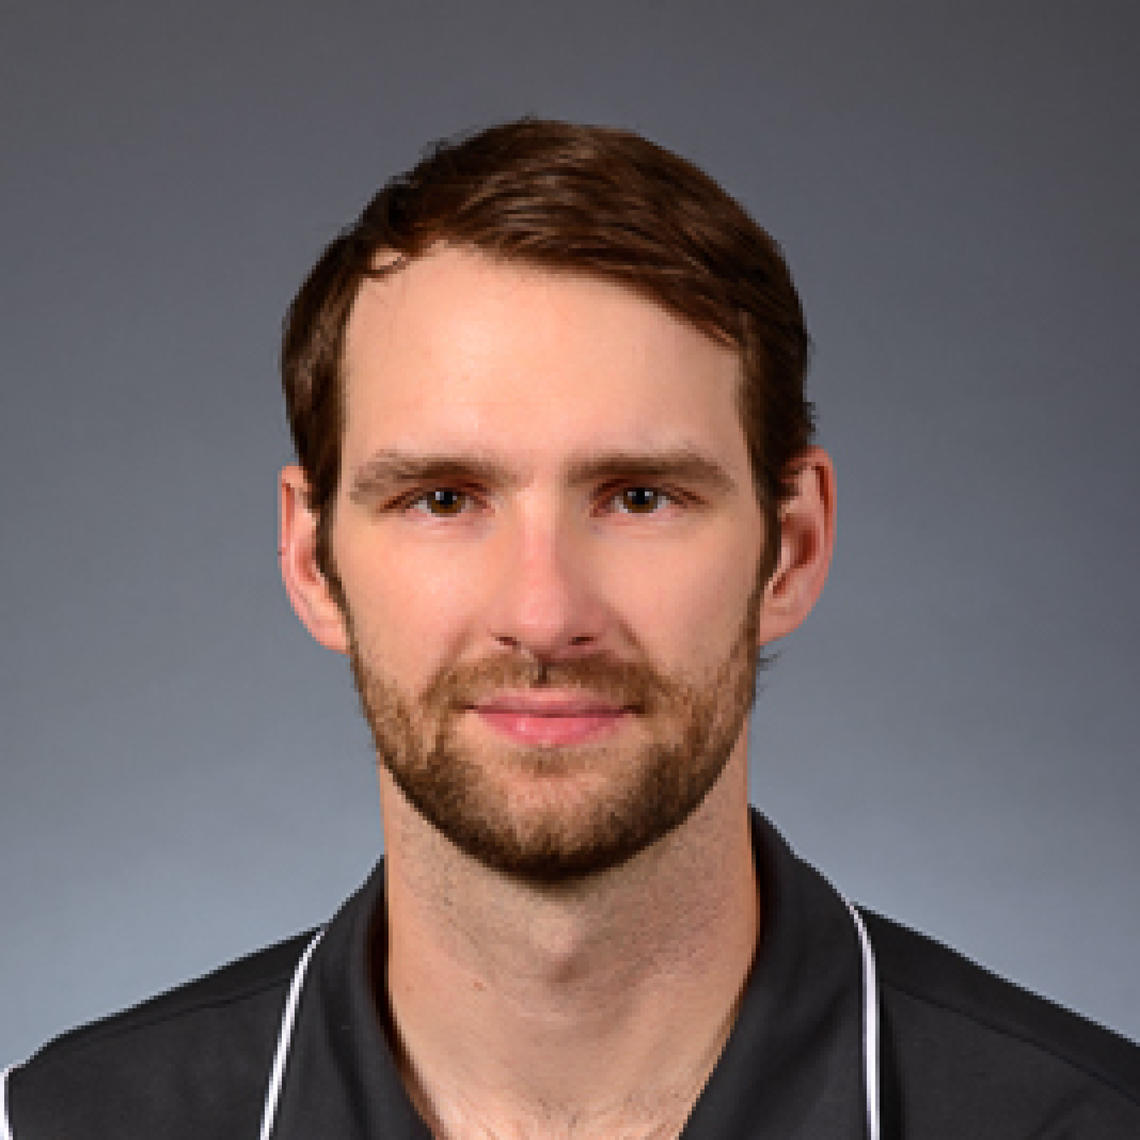 Chris Linder, athletic therapist for the University of Calgary